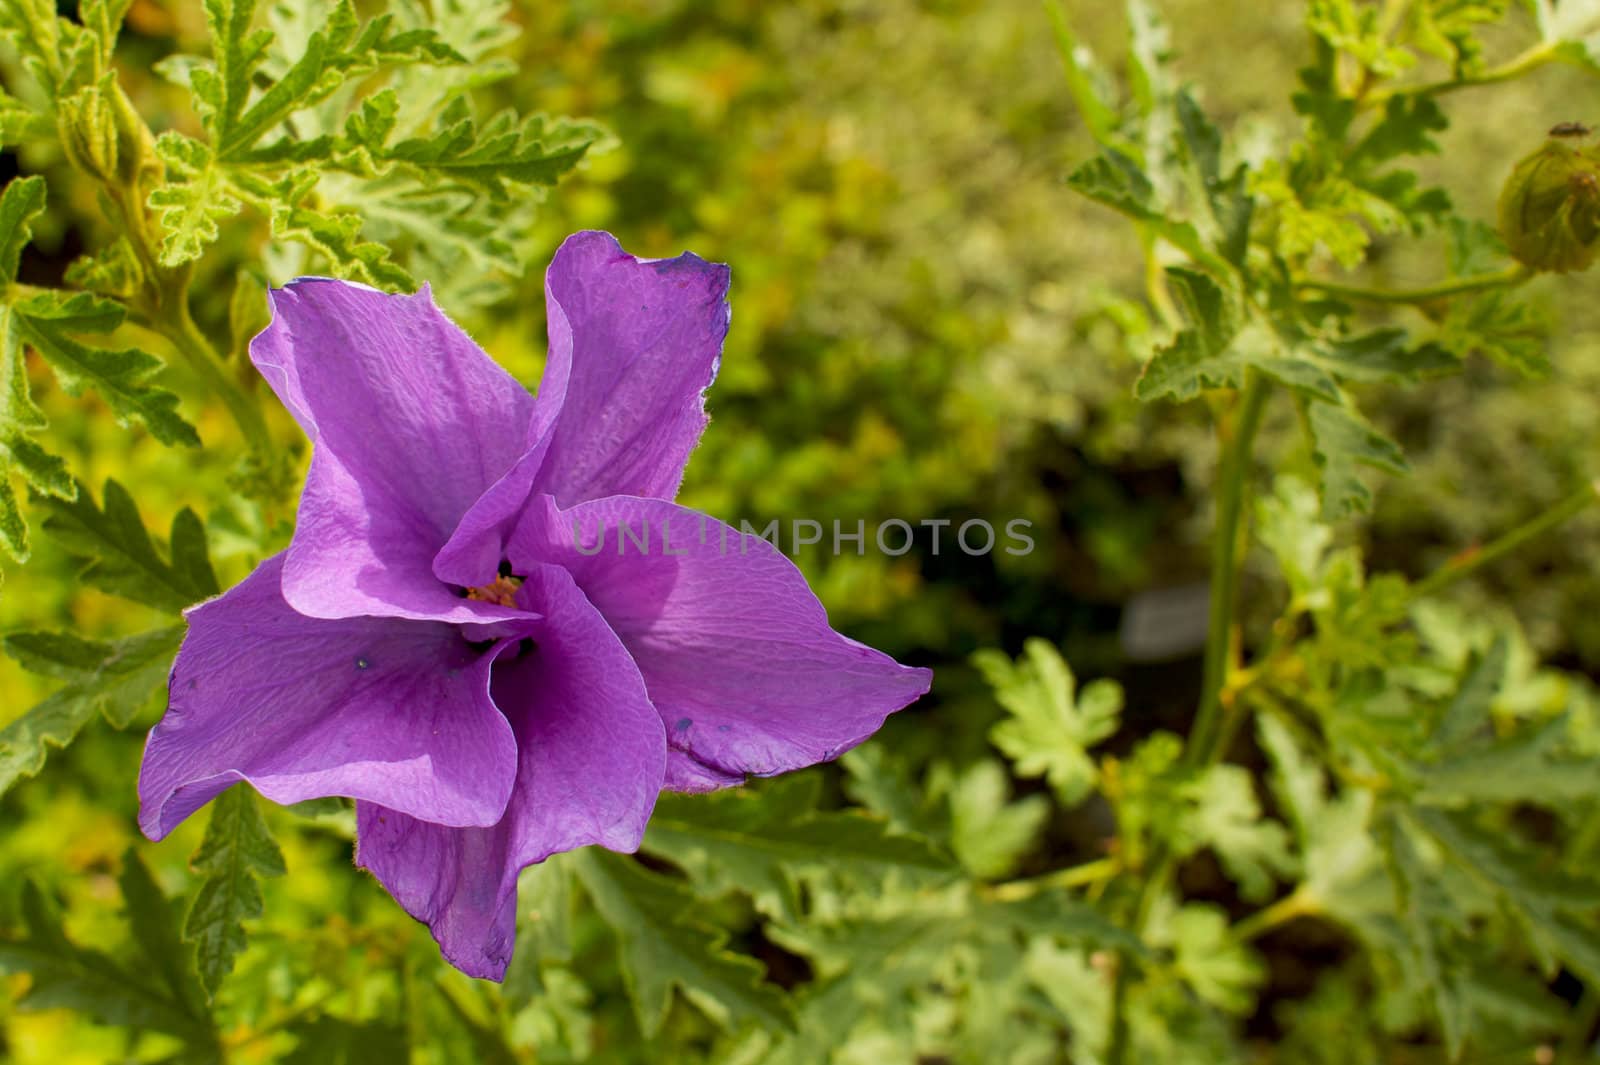 Clematis like purple flower with a green leaf soft focus background